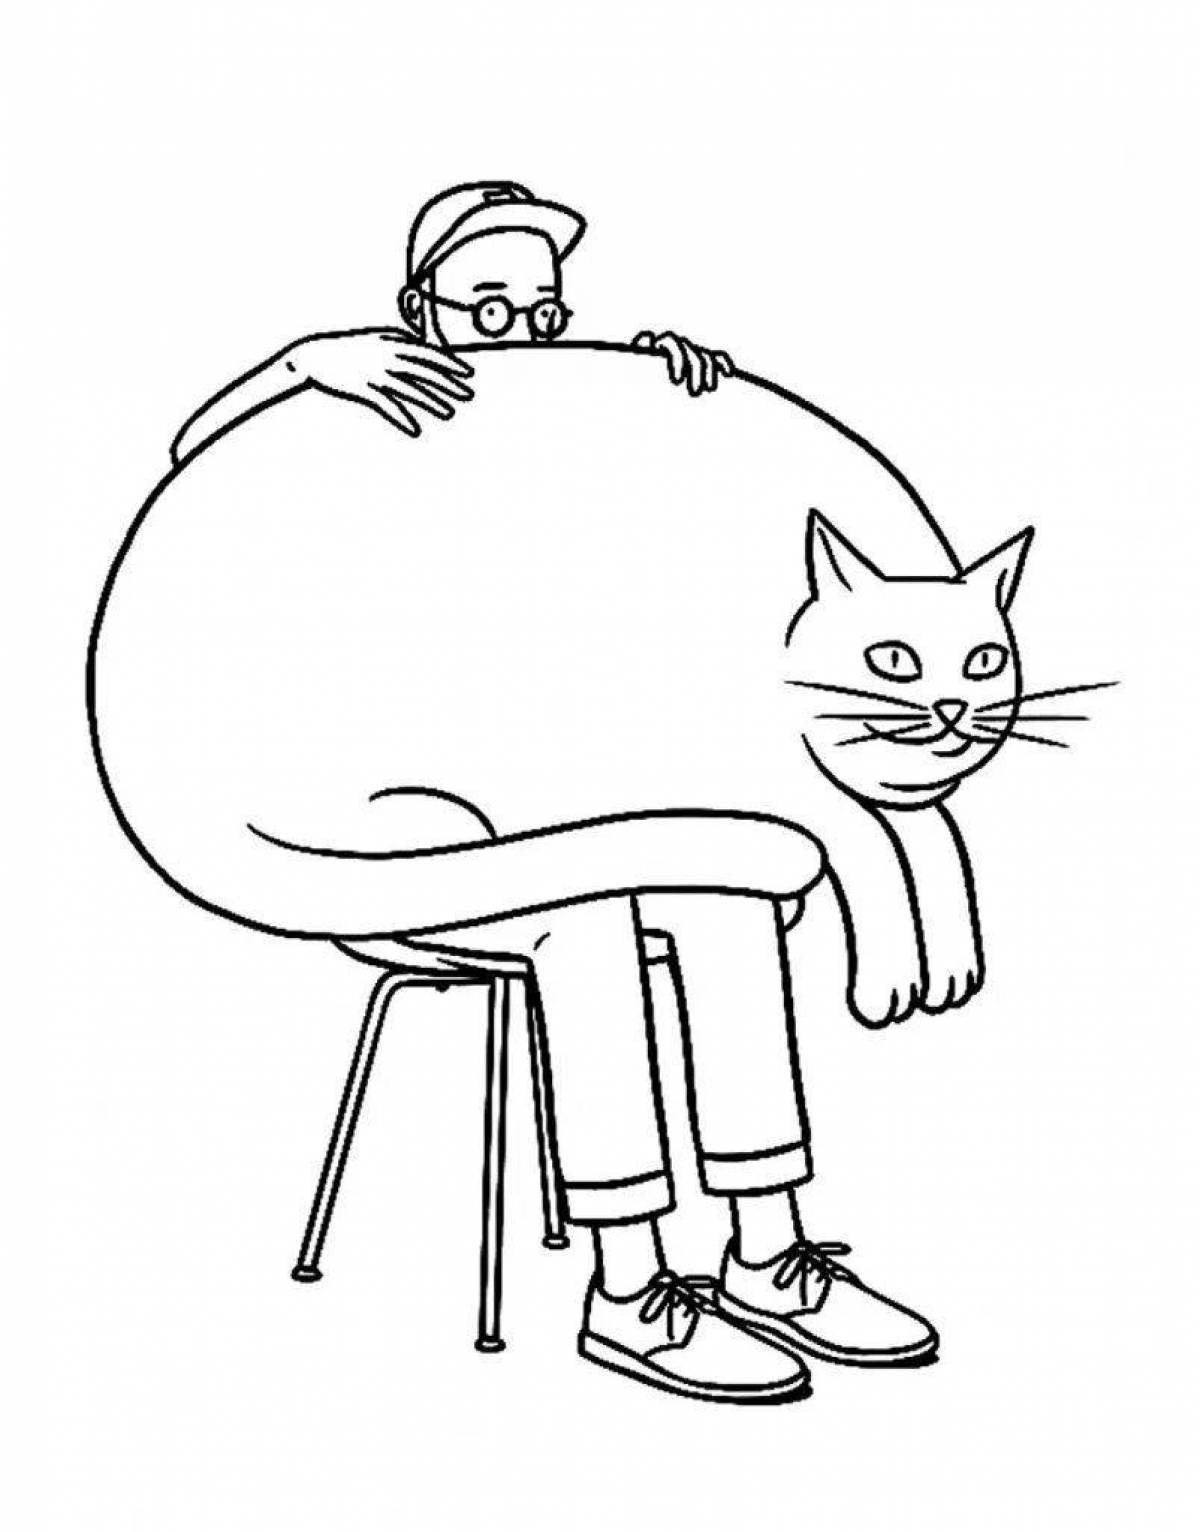 Coloring page dozing fat cat